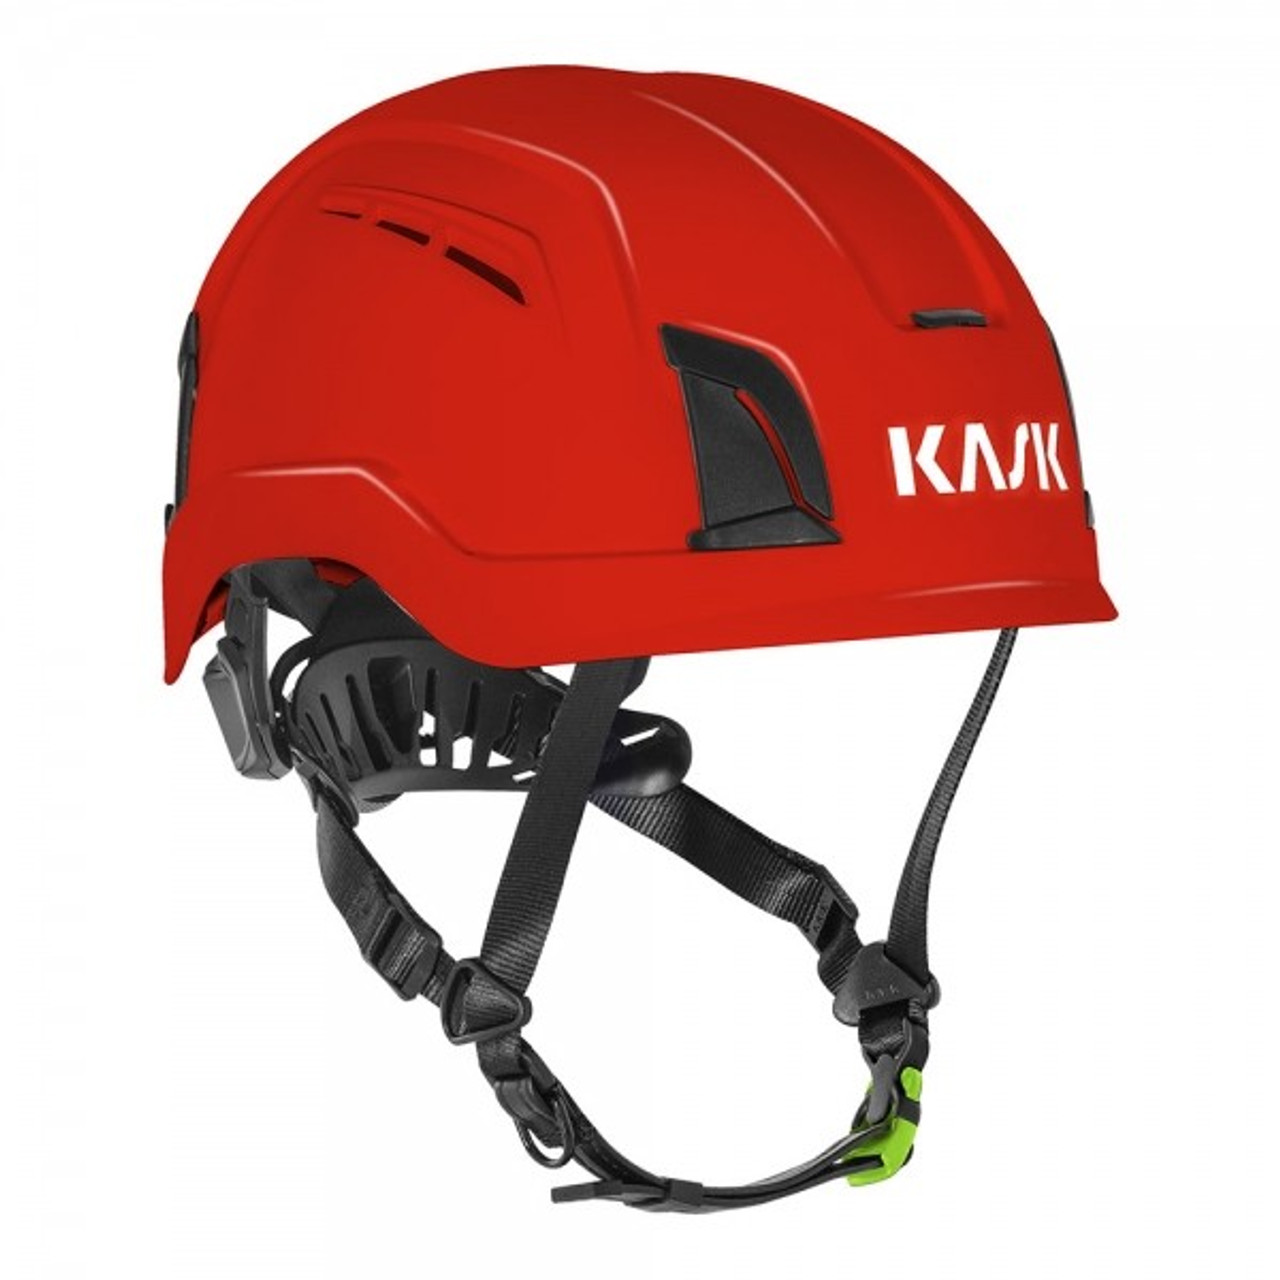 KASK WHE00099-204 ZENITH X2 AIR  RED VENTILATED ZENITH HELMET  ANSI Z89.1 TYPE I & TYPE II CLASS C